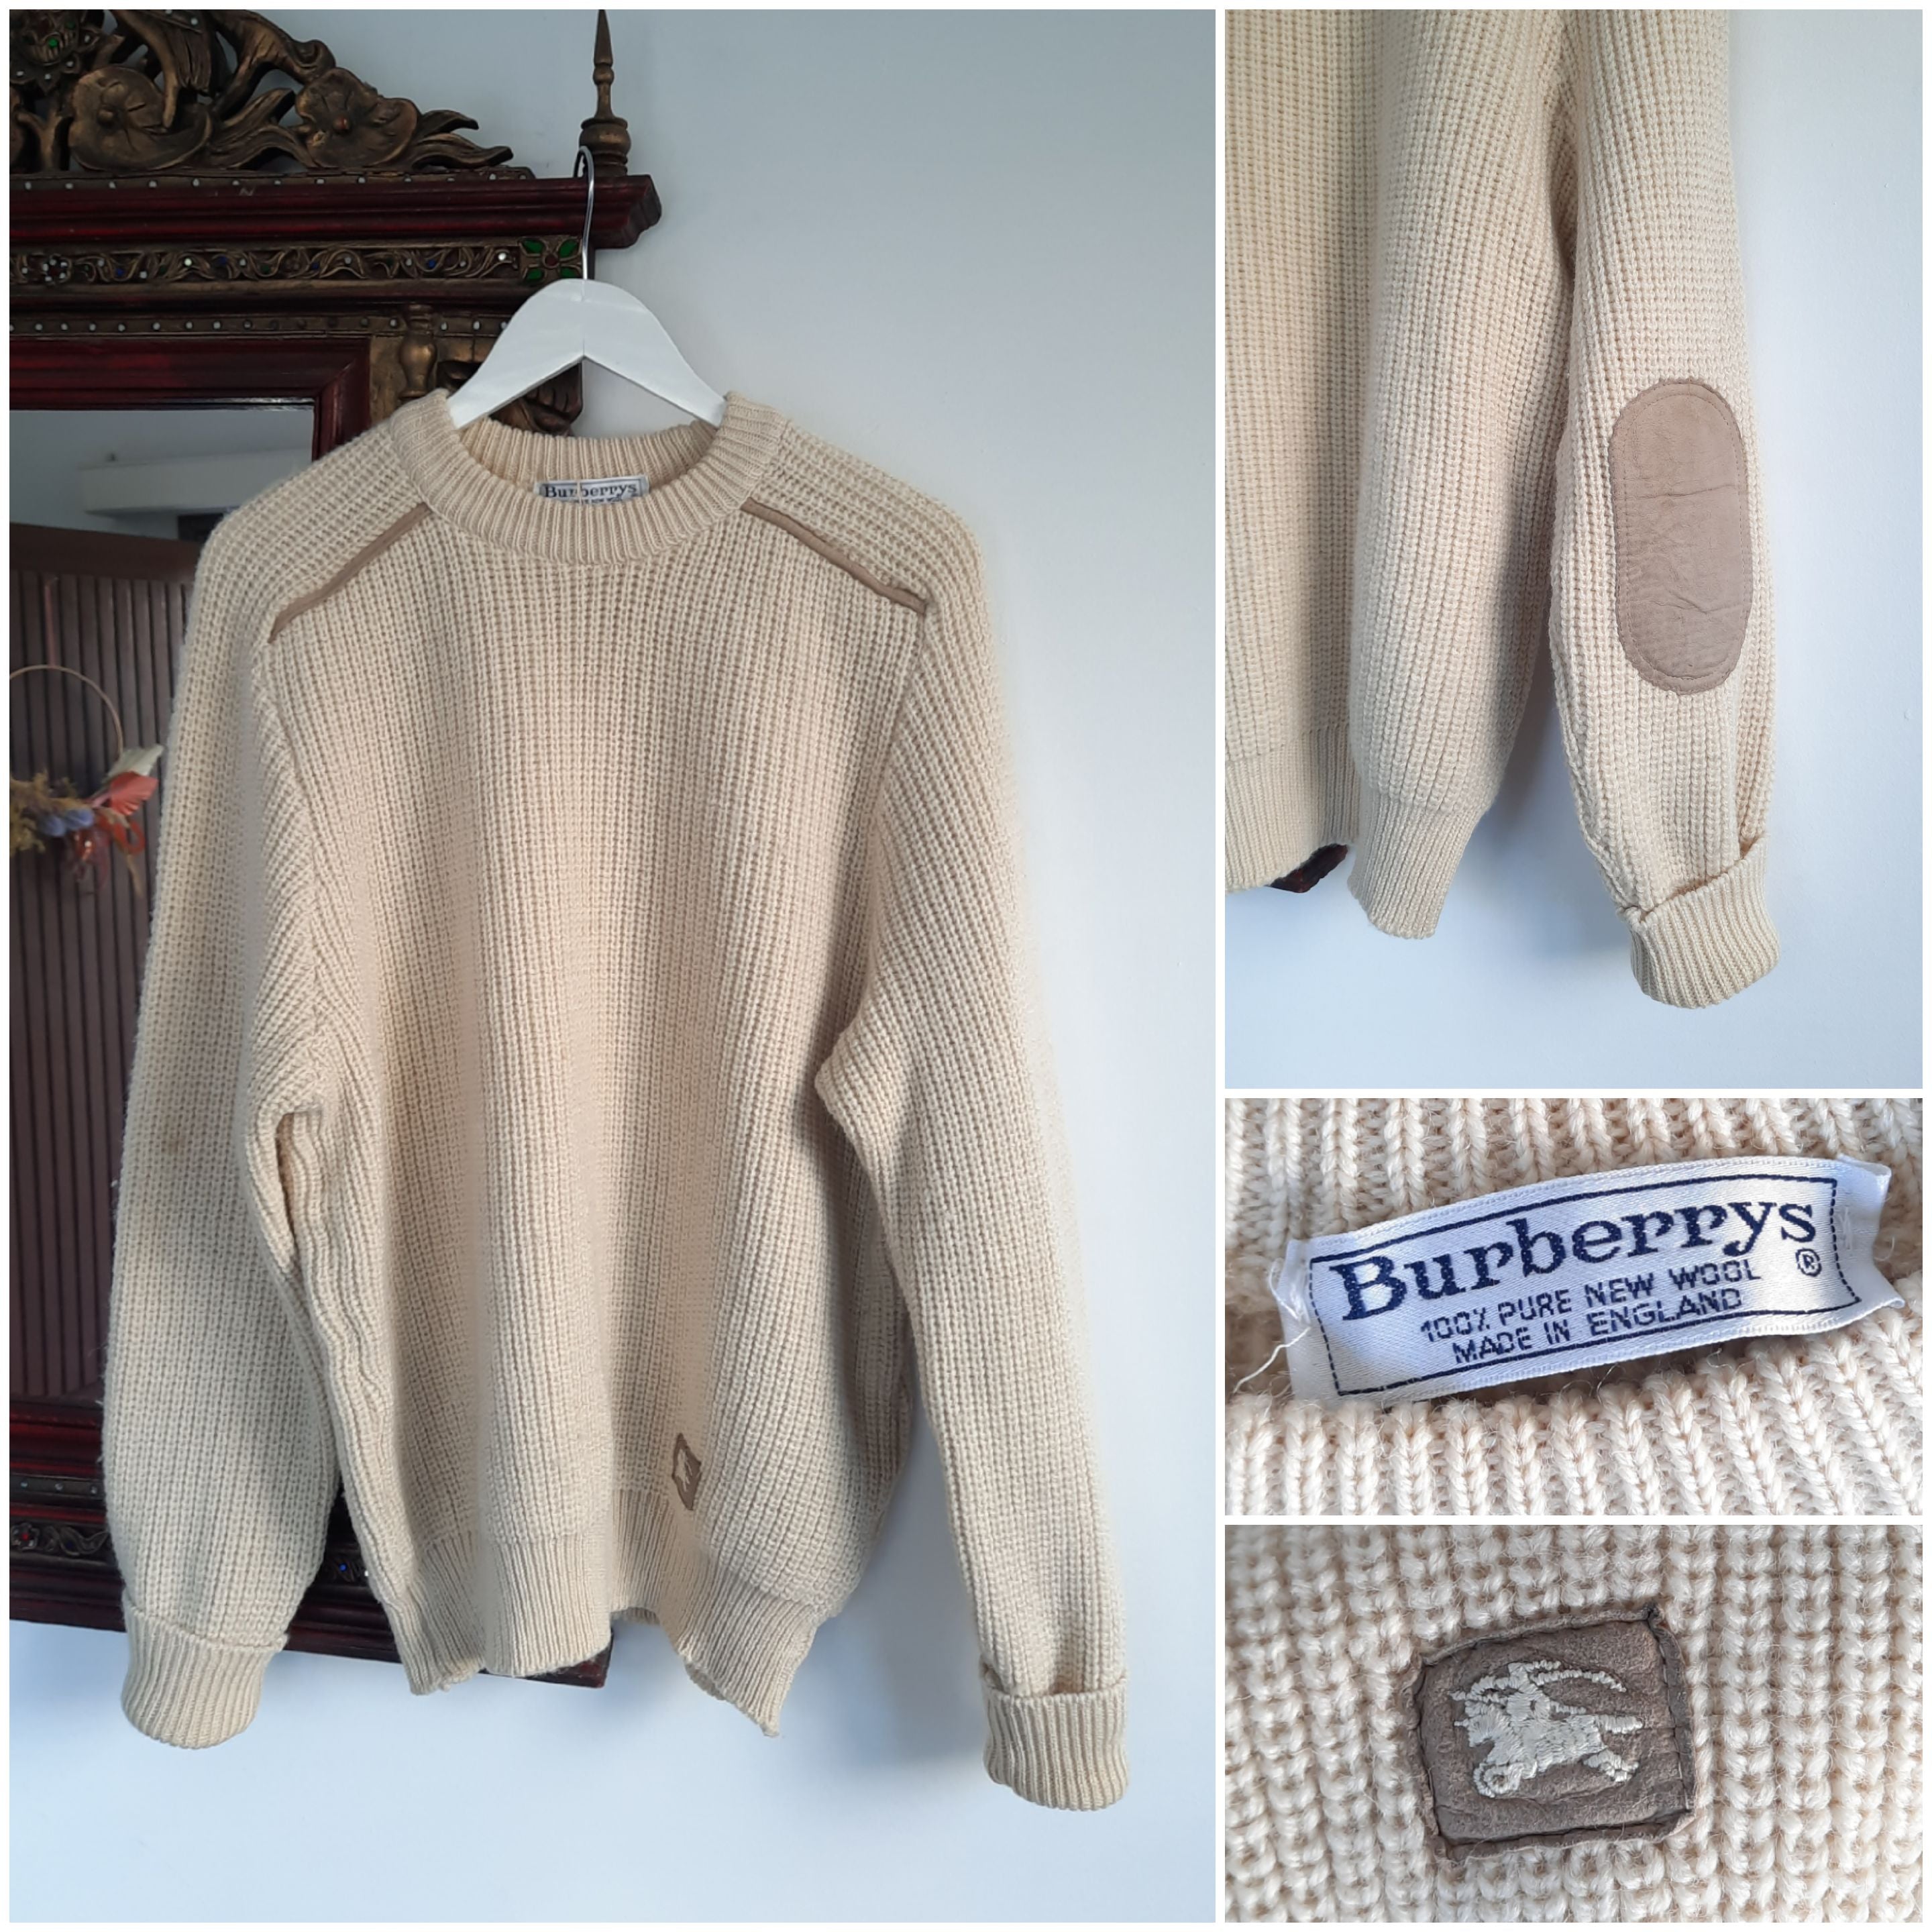 Vintage Burberry Heavy Knit Jumper – the collective concept